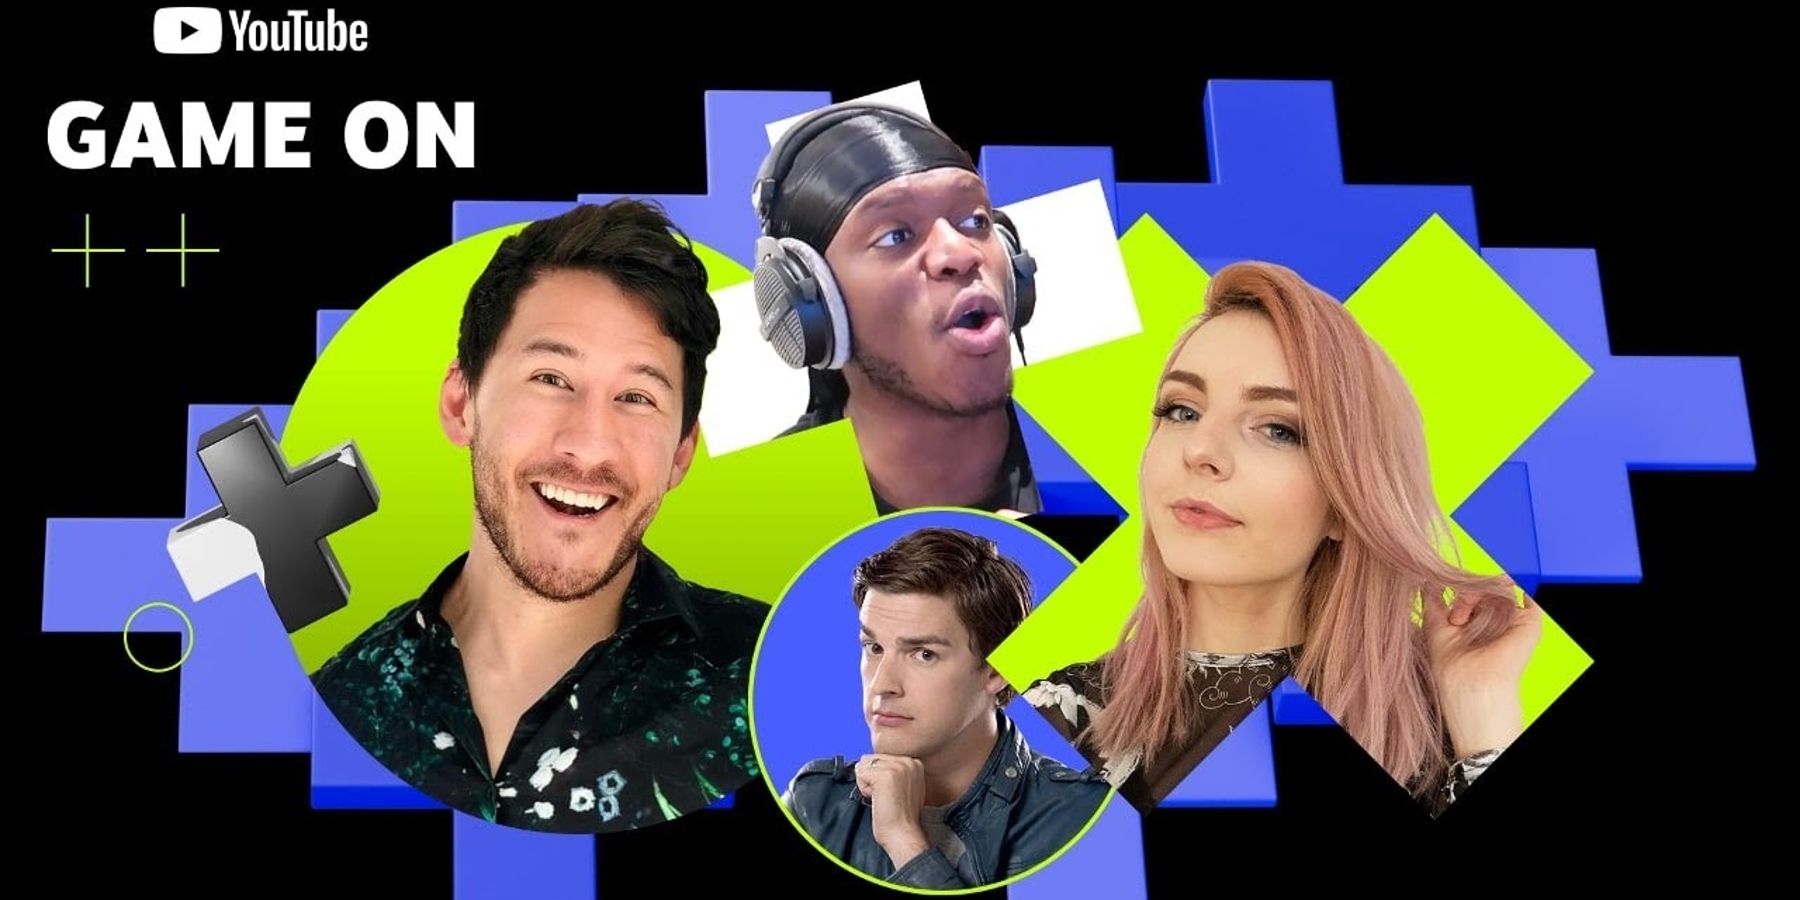 YouTube Game On interactive livestream event markiplier thumbnail